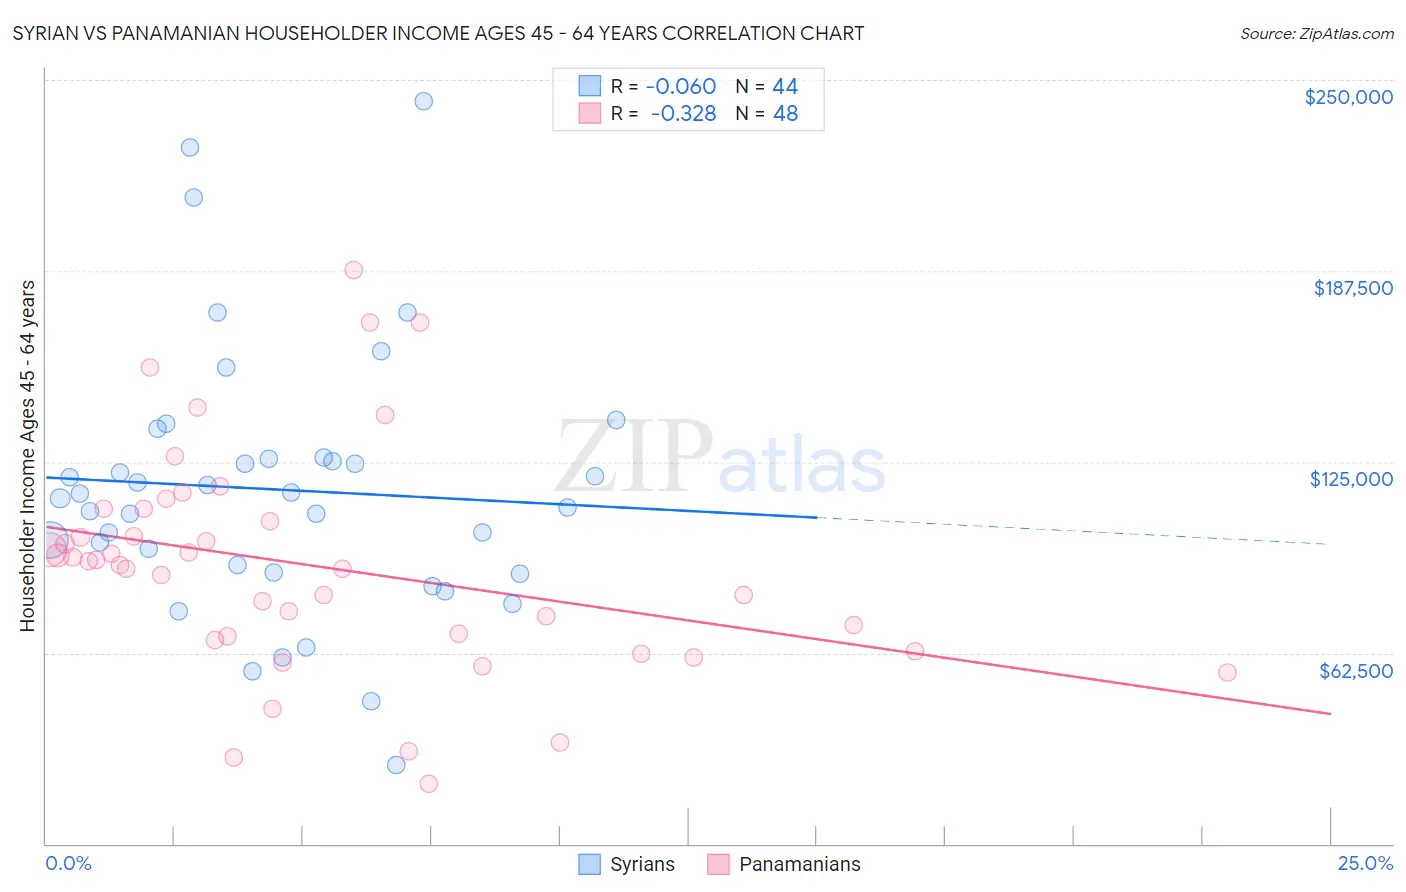 Syrian vs Panamanian Householder Income Ages 45 - 64 years